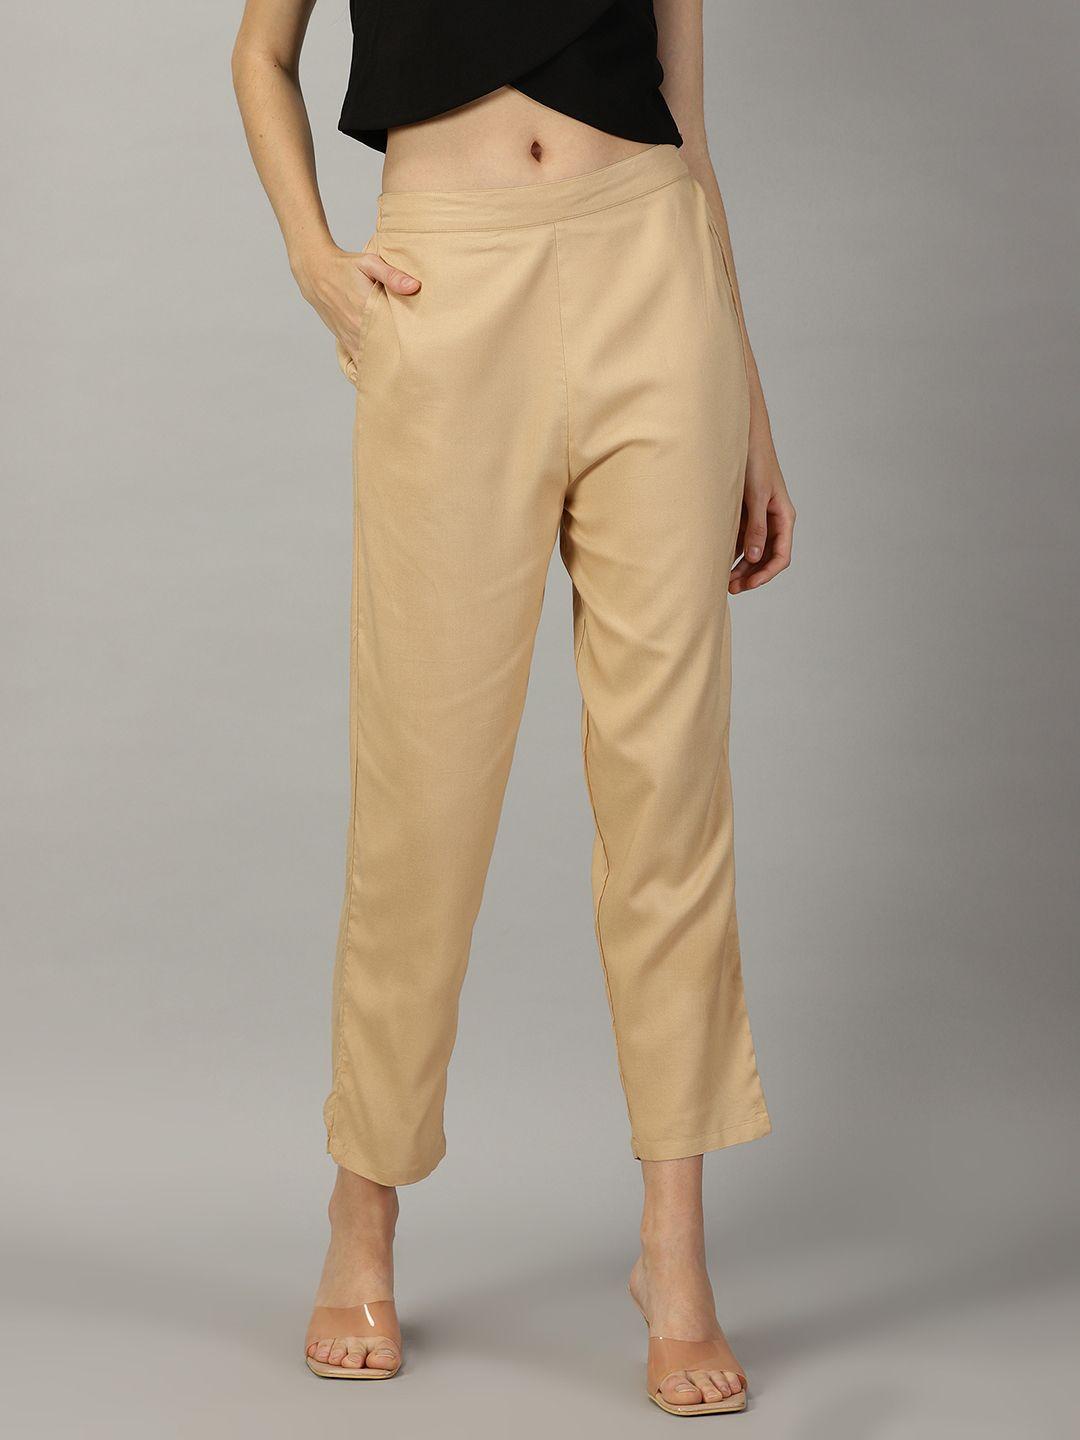 hay women tan relaxed straight leg trousers